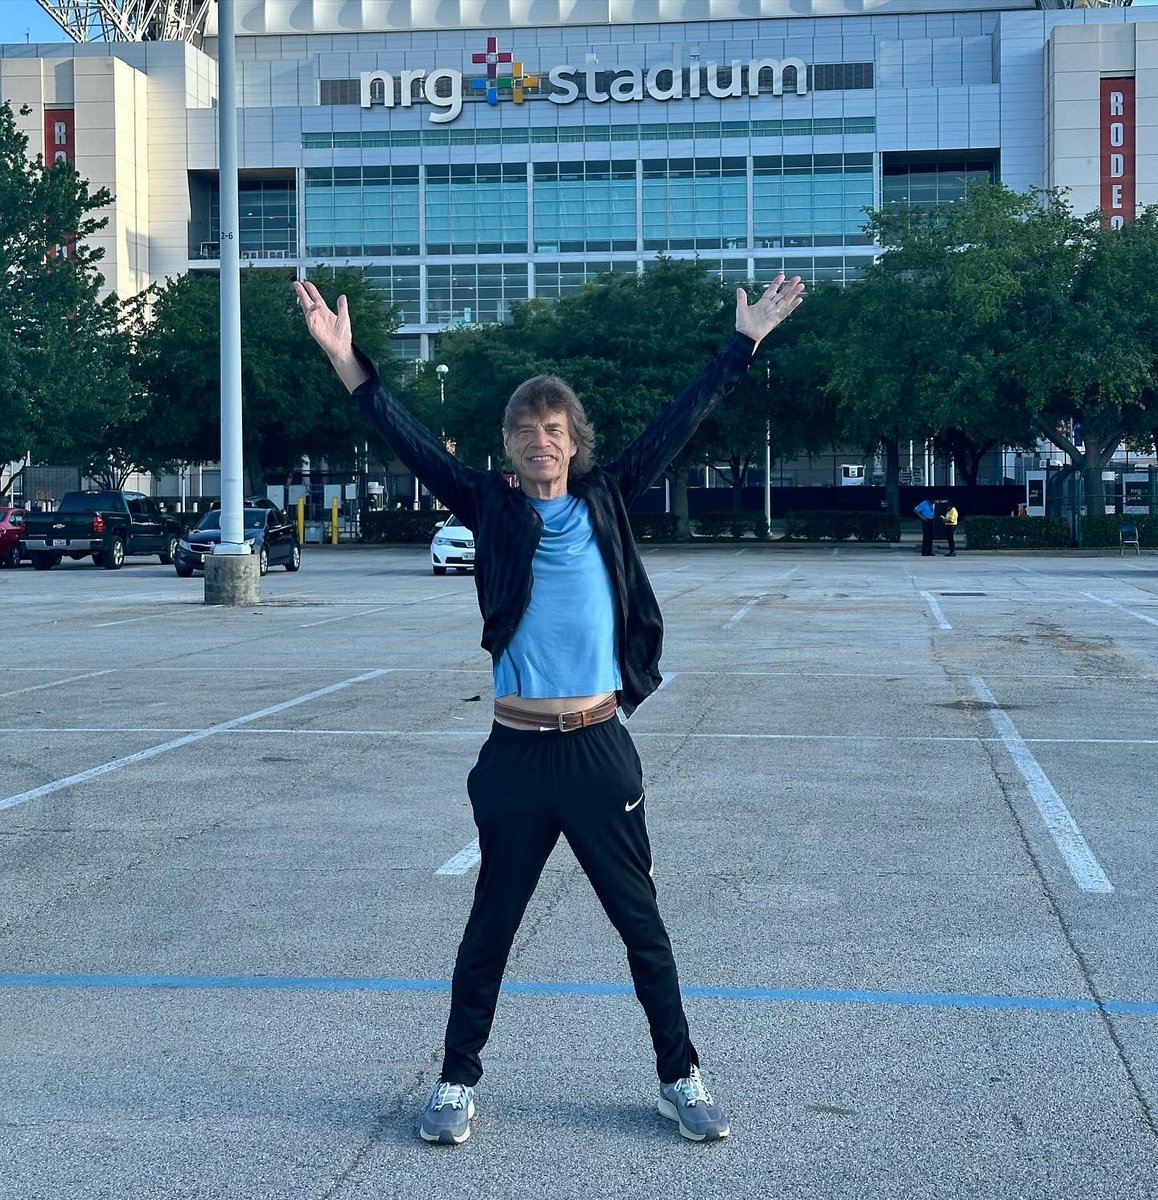 This Is Mick Jagger Of The Rolling Stones, They Are On Tour And Playing a Show At NRG Stadium, Oh And By The Way MICK JAGGER IS 80 Years Old, 80, And Will Be 81 This July